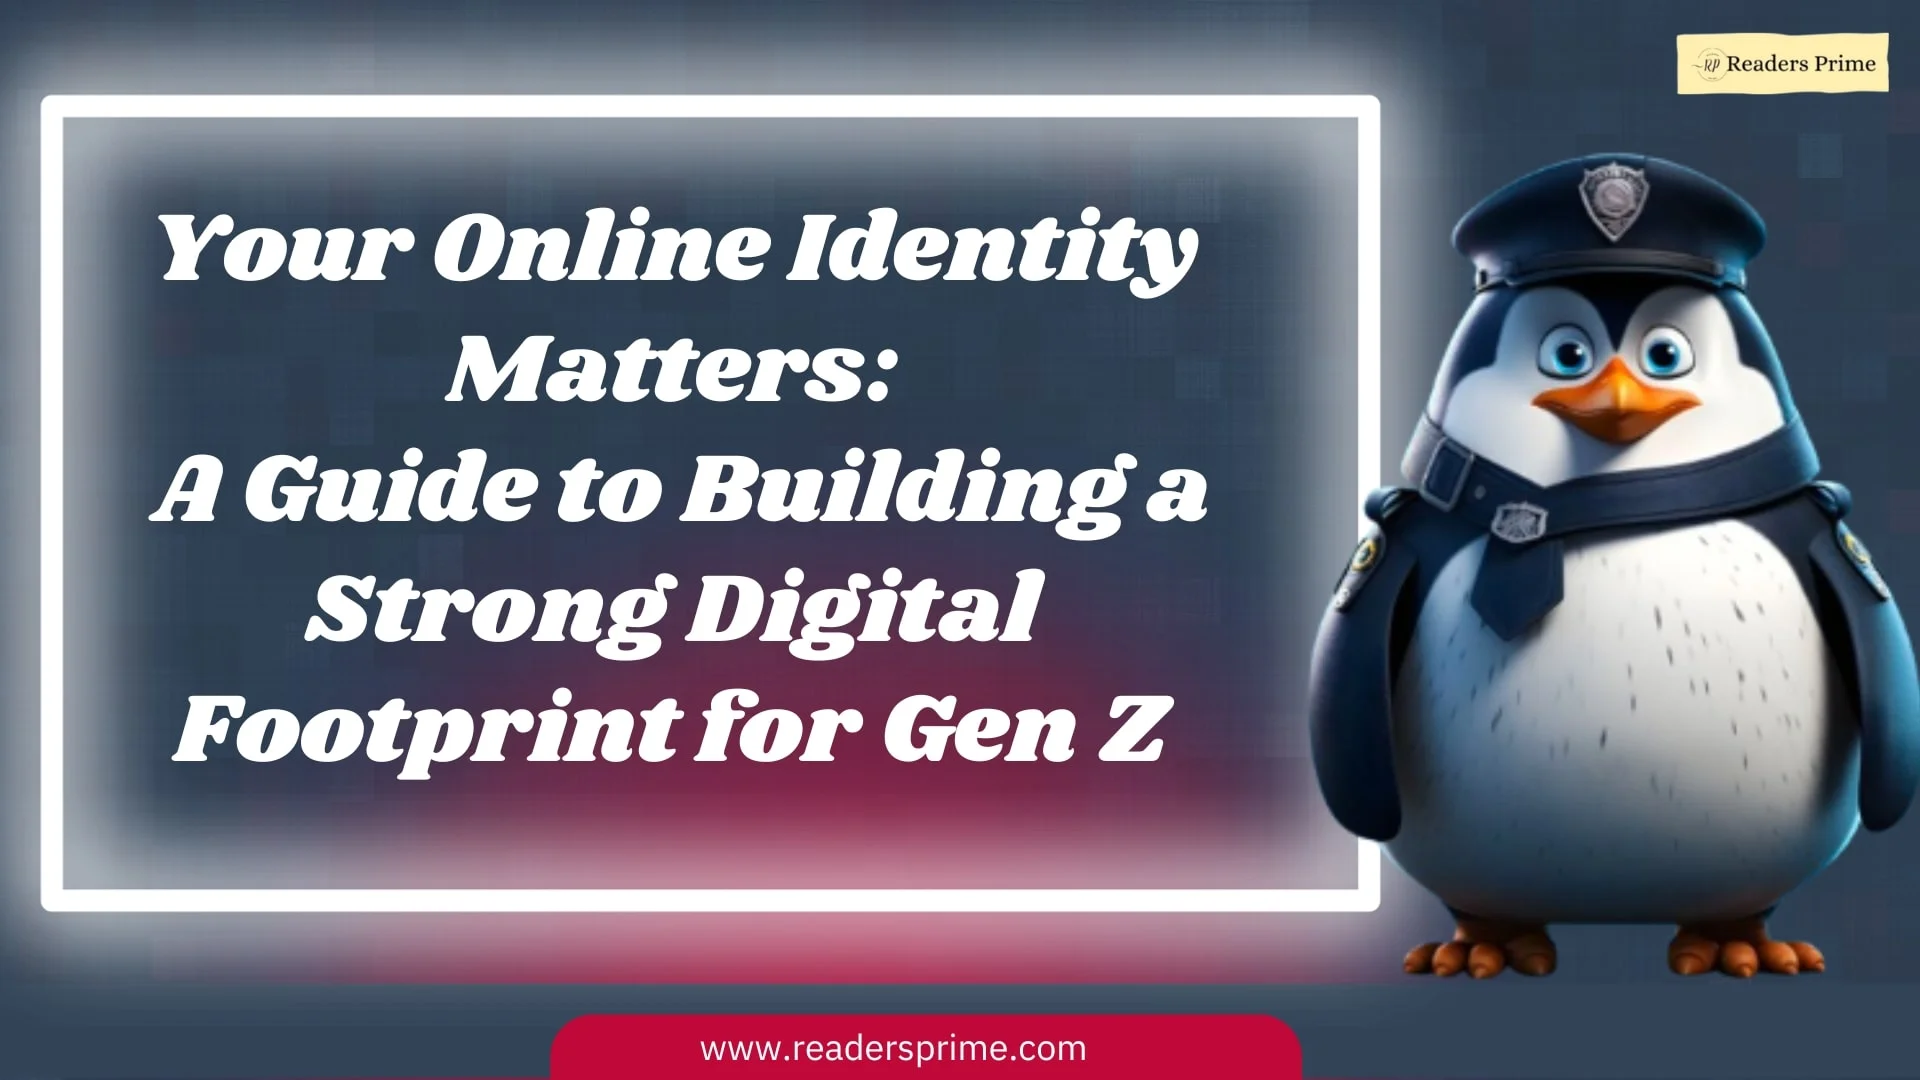 Your Online Identity Matters: A Guide to Building a Strong Digital Footprint for Gen Z